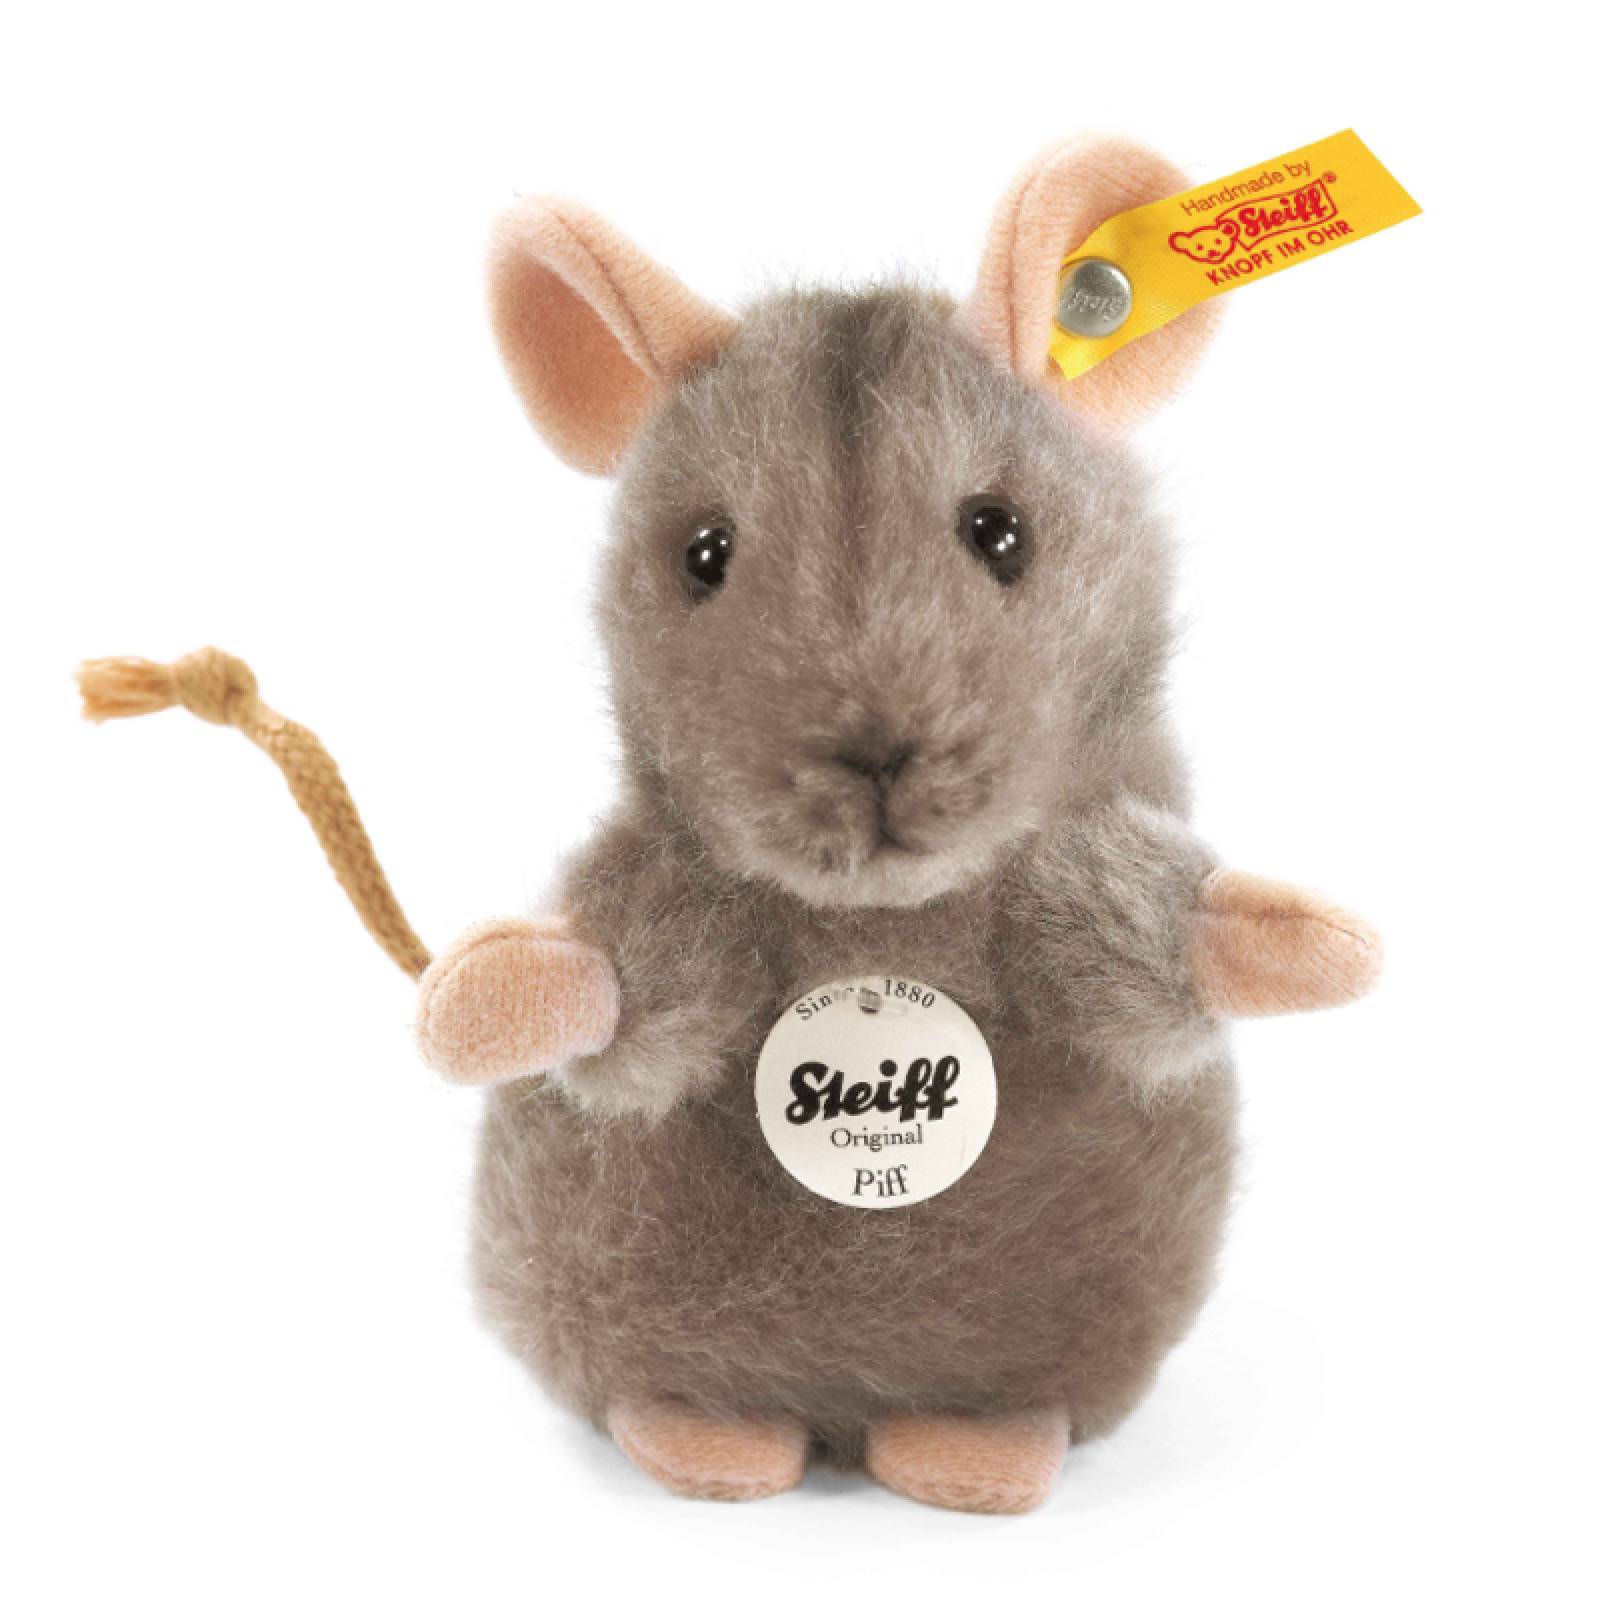 Piff Mouse Soft Toy Mouse By Steiff 0+